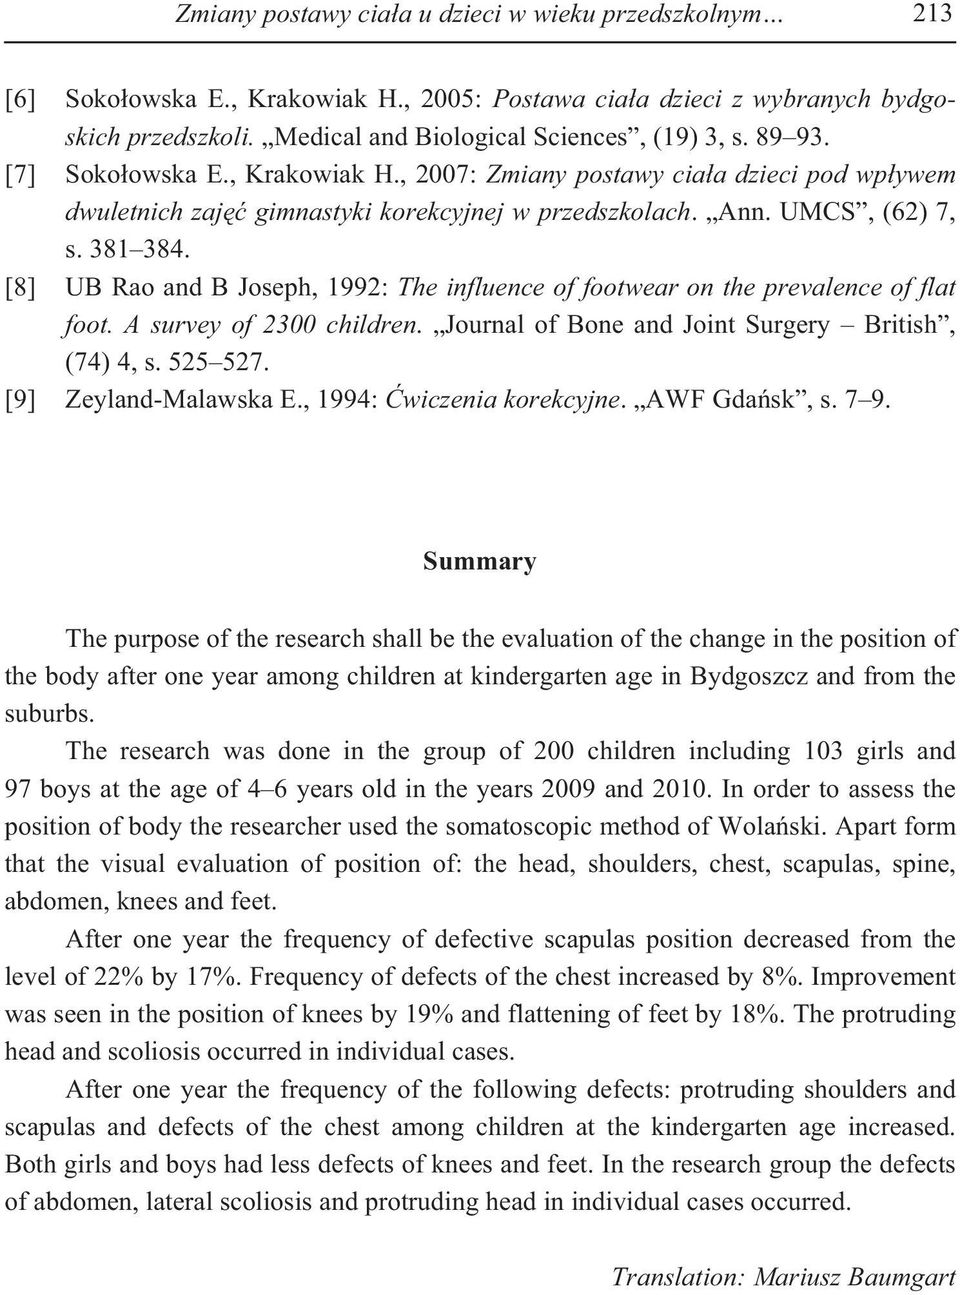 [8] UB Rao and B Joseph, 1992: The influence of footwear on the prevalence of flat foot. A survey of 2300 children. Journal of Bone and Joint Surgery British, (74) 4, s. 525 527.